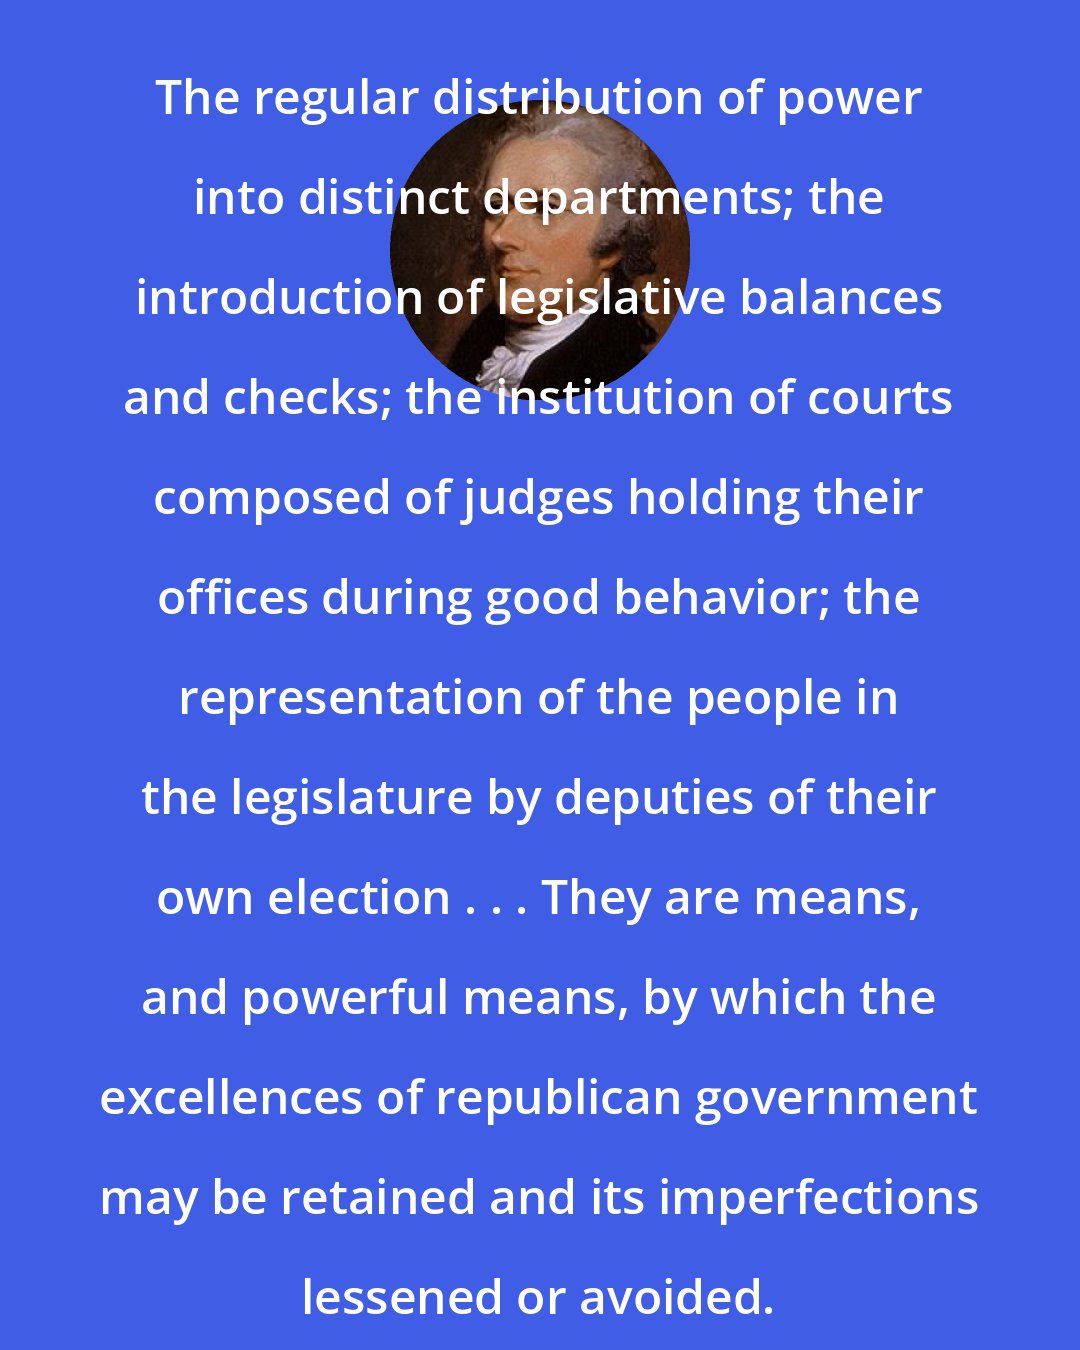 Alexander Hamilton: The regular distribution of power into distinct departments; the introduction of legislative balances and checks; the institution of courts composed of judges holding their offices during good behavior; the representation of the people in the legislature by deputies of their own election . . . They are means, and powerful means, by which the excellences of republican government may be retained and its imperfections lessened or avoided.